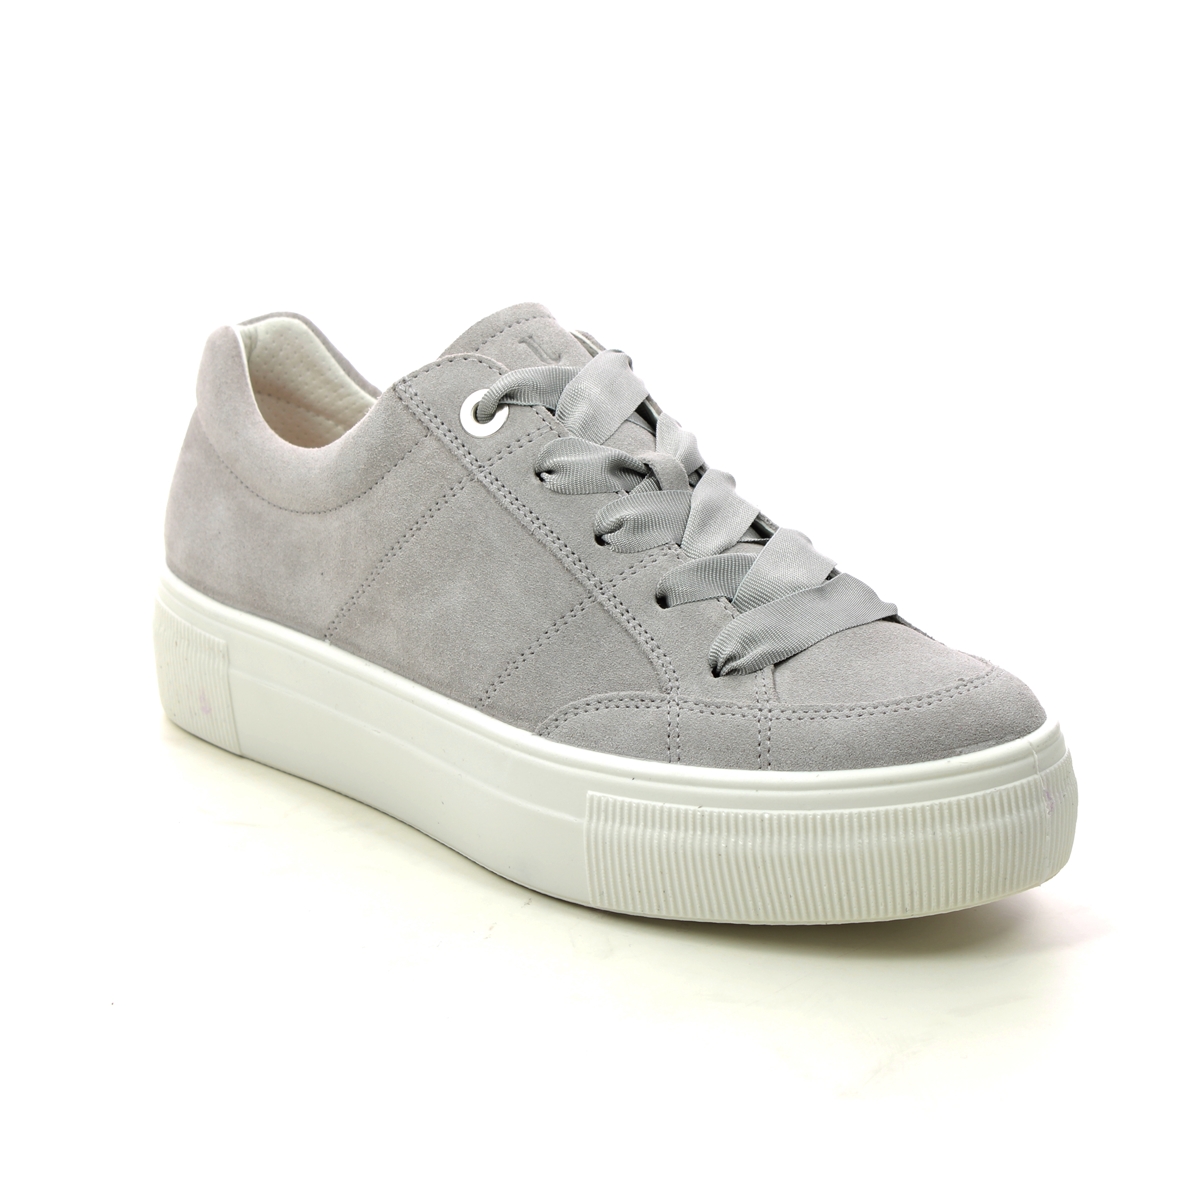 Legero Lima Stitch Light Grey Suede Womens Trainers 0600910-2500 In Size 40 In Plain Light Grey Suede